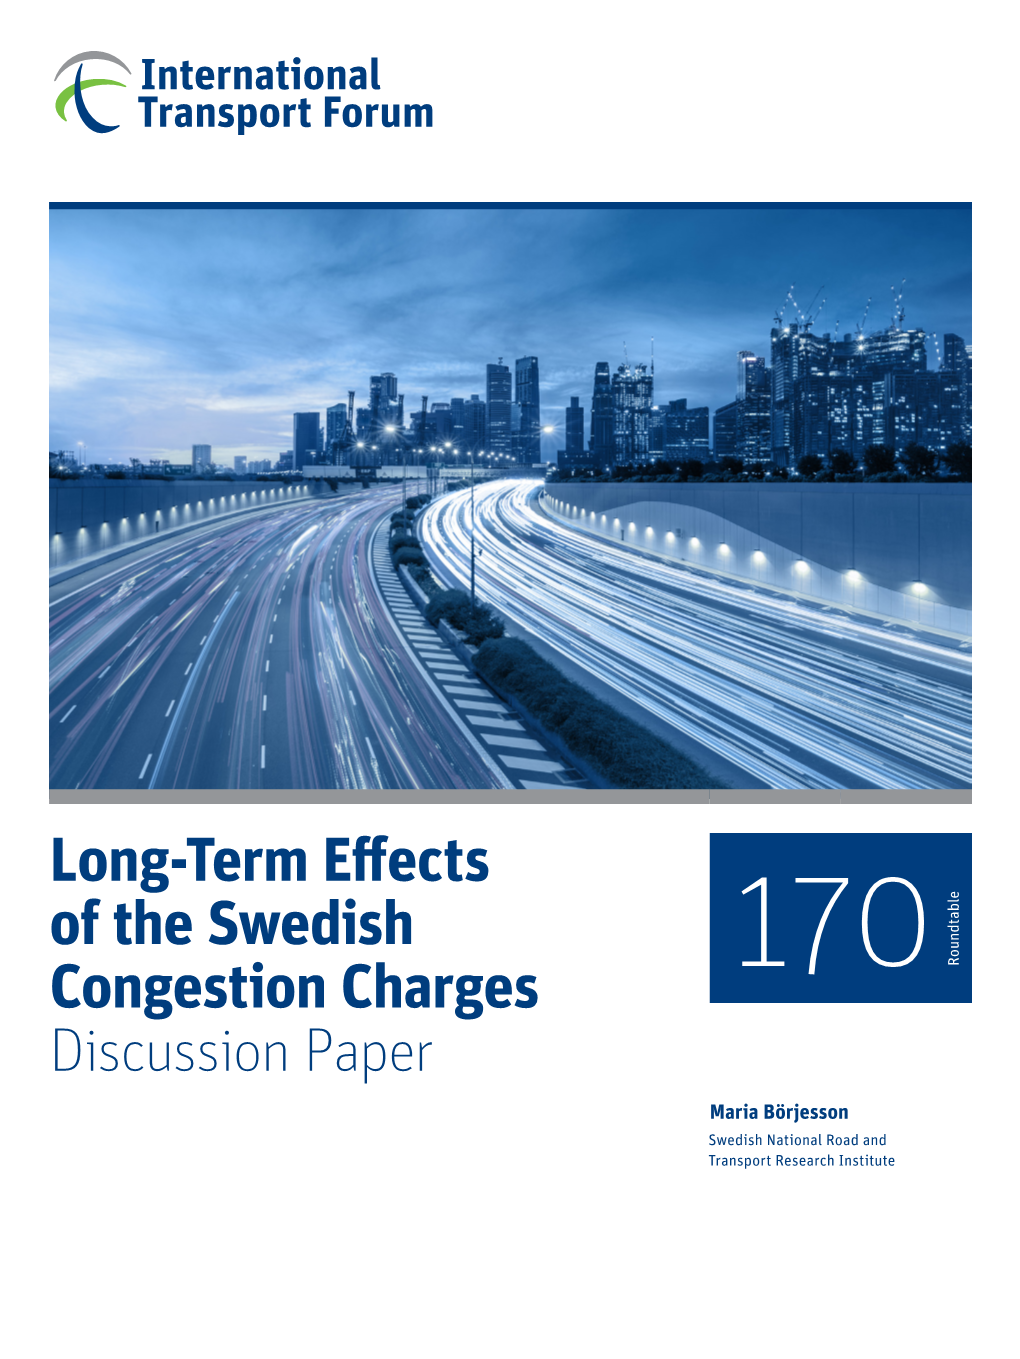 Long-Term Effects of the Swedish Congestion Charges Discussion